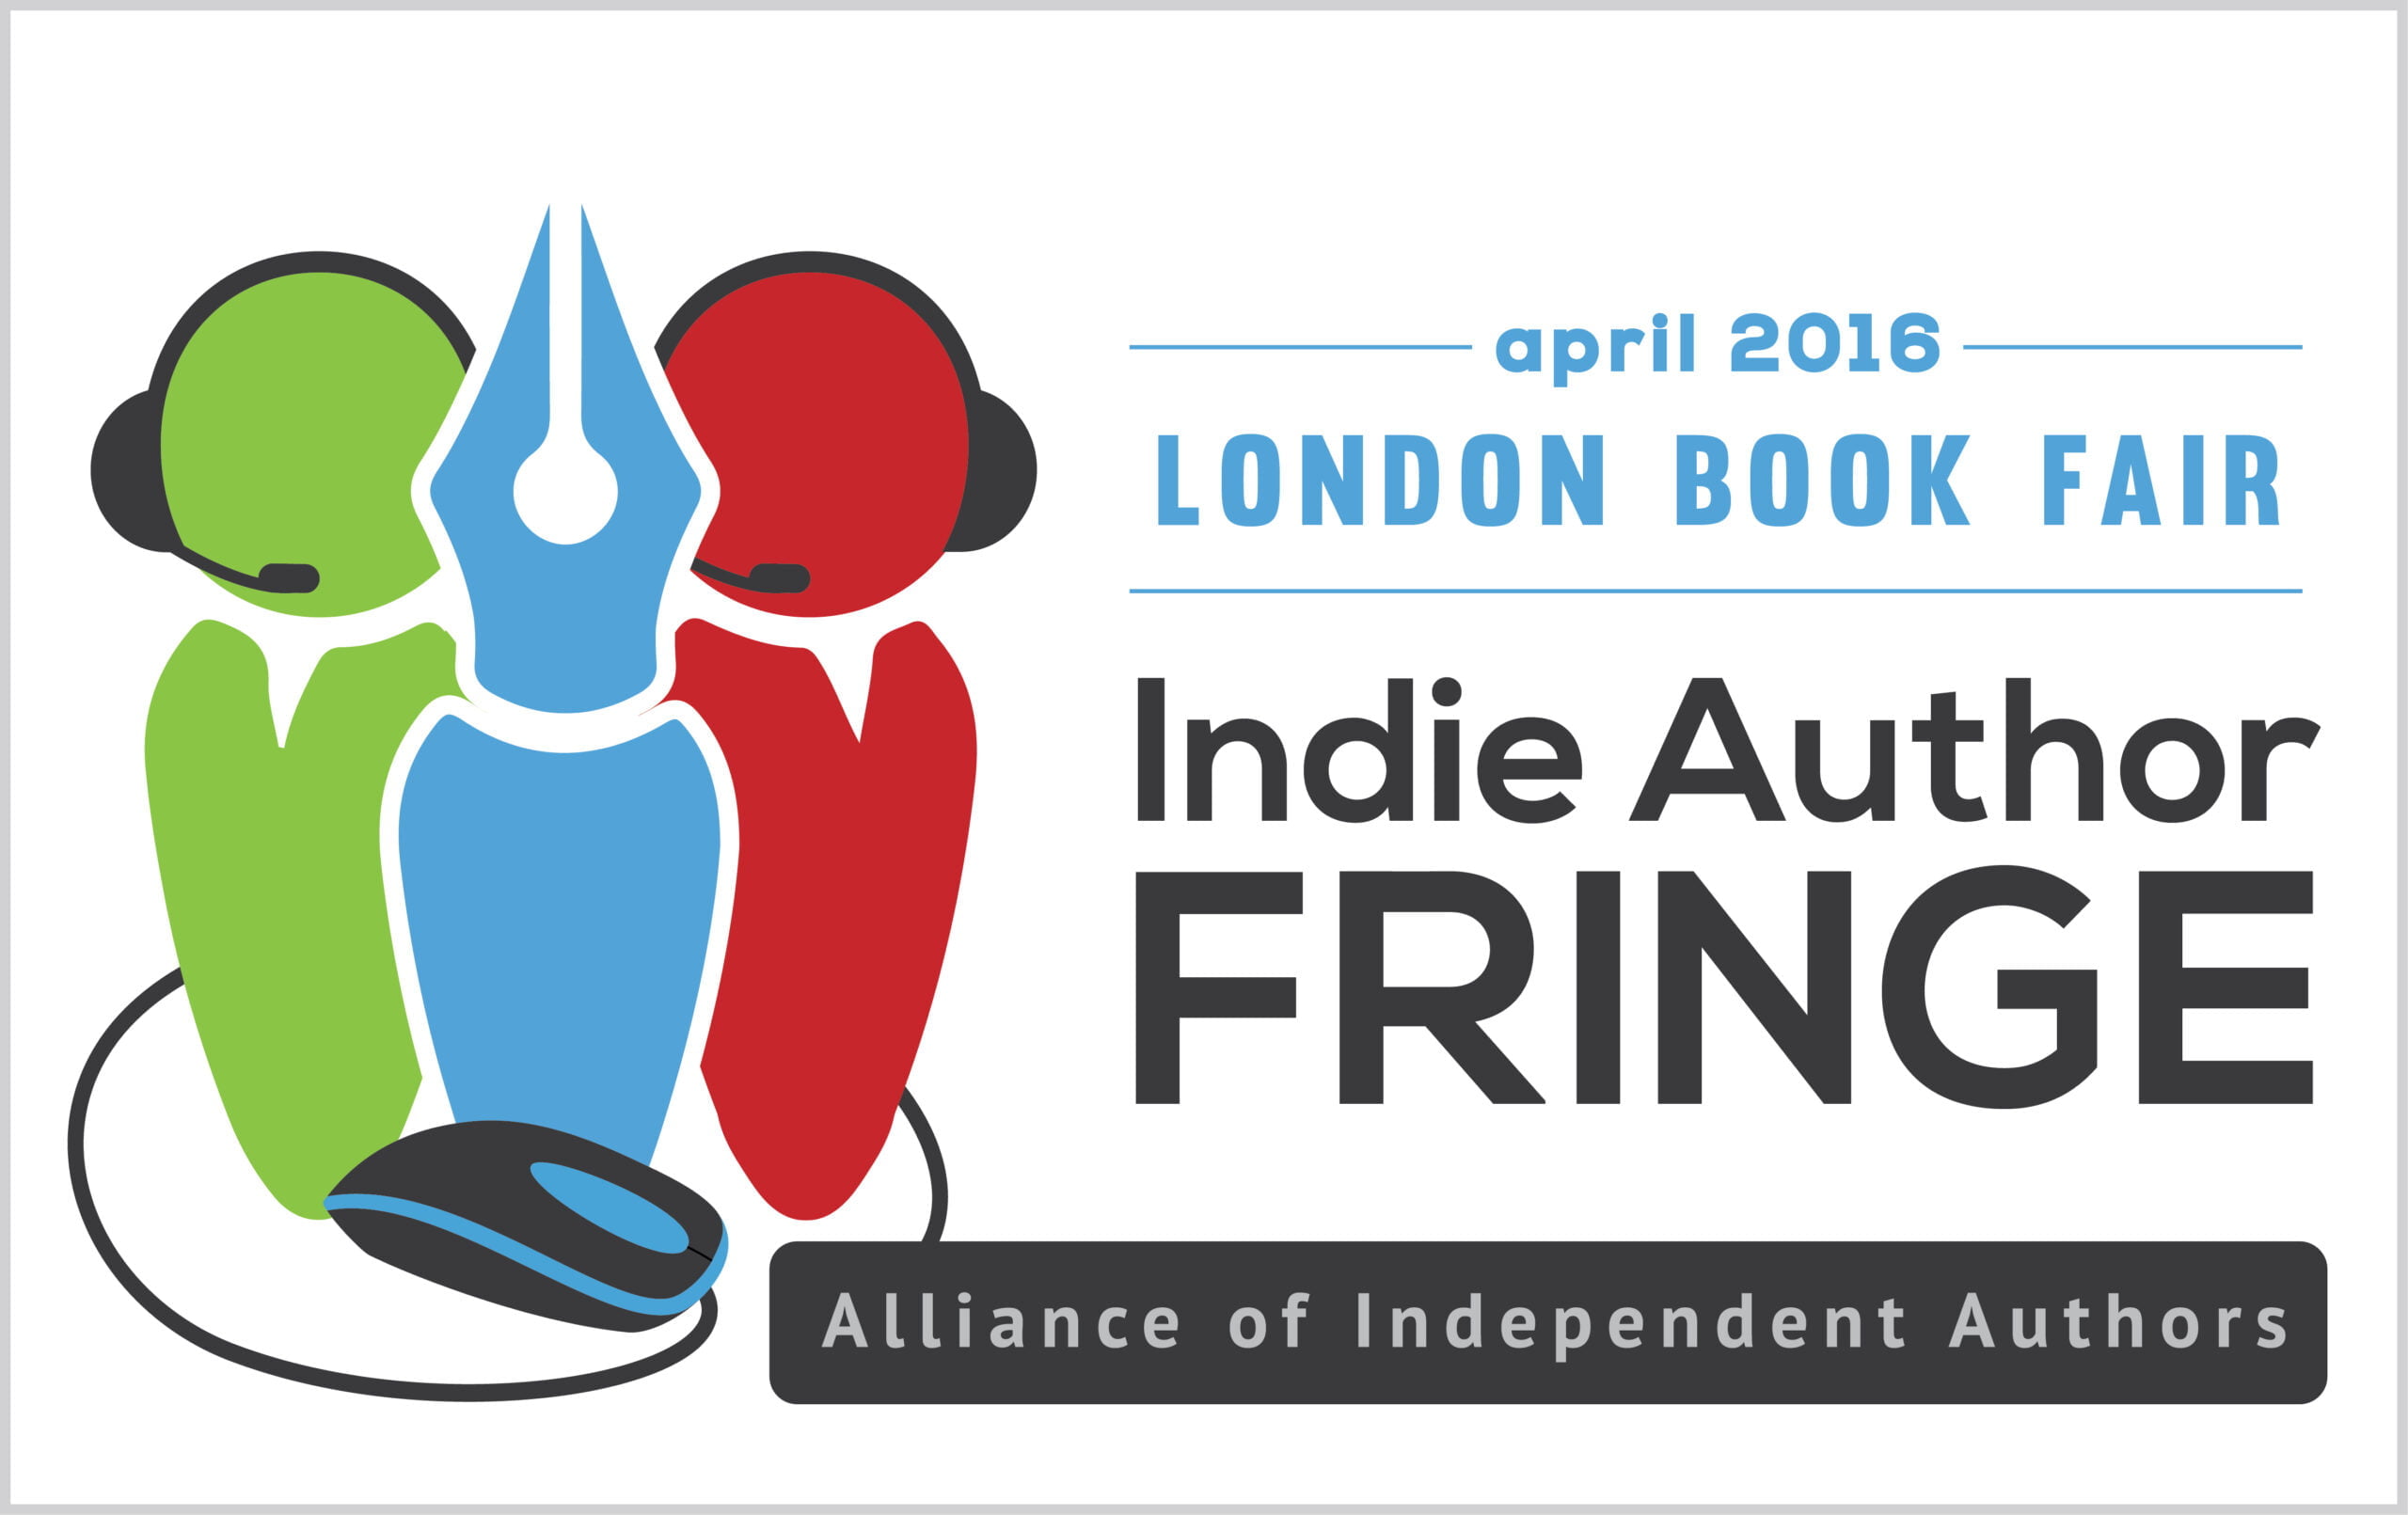 Welcome To London Book Fair Indie Author Fringe: Jay Artale, David Penny, Orna Ross